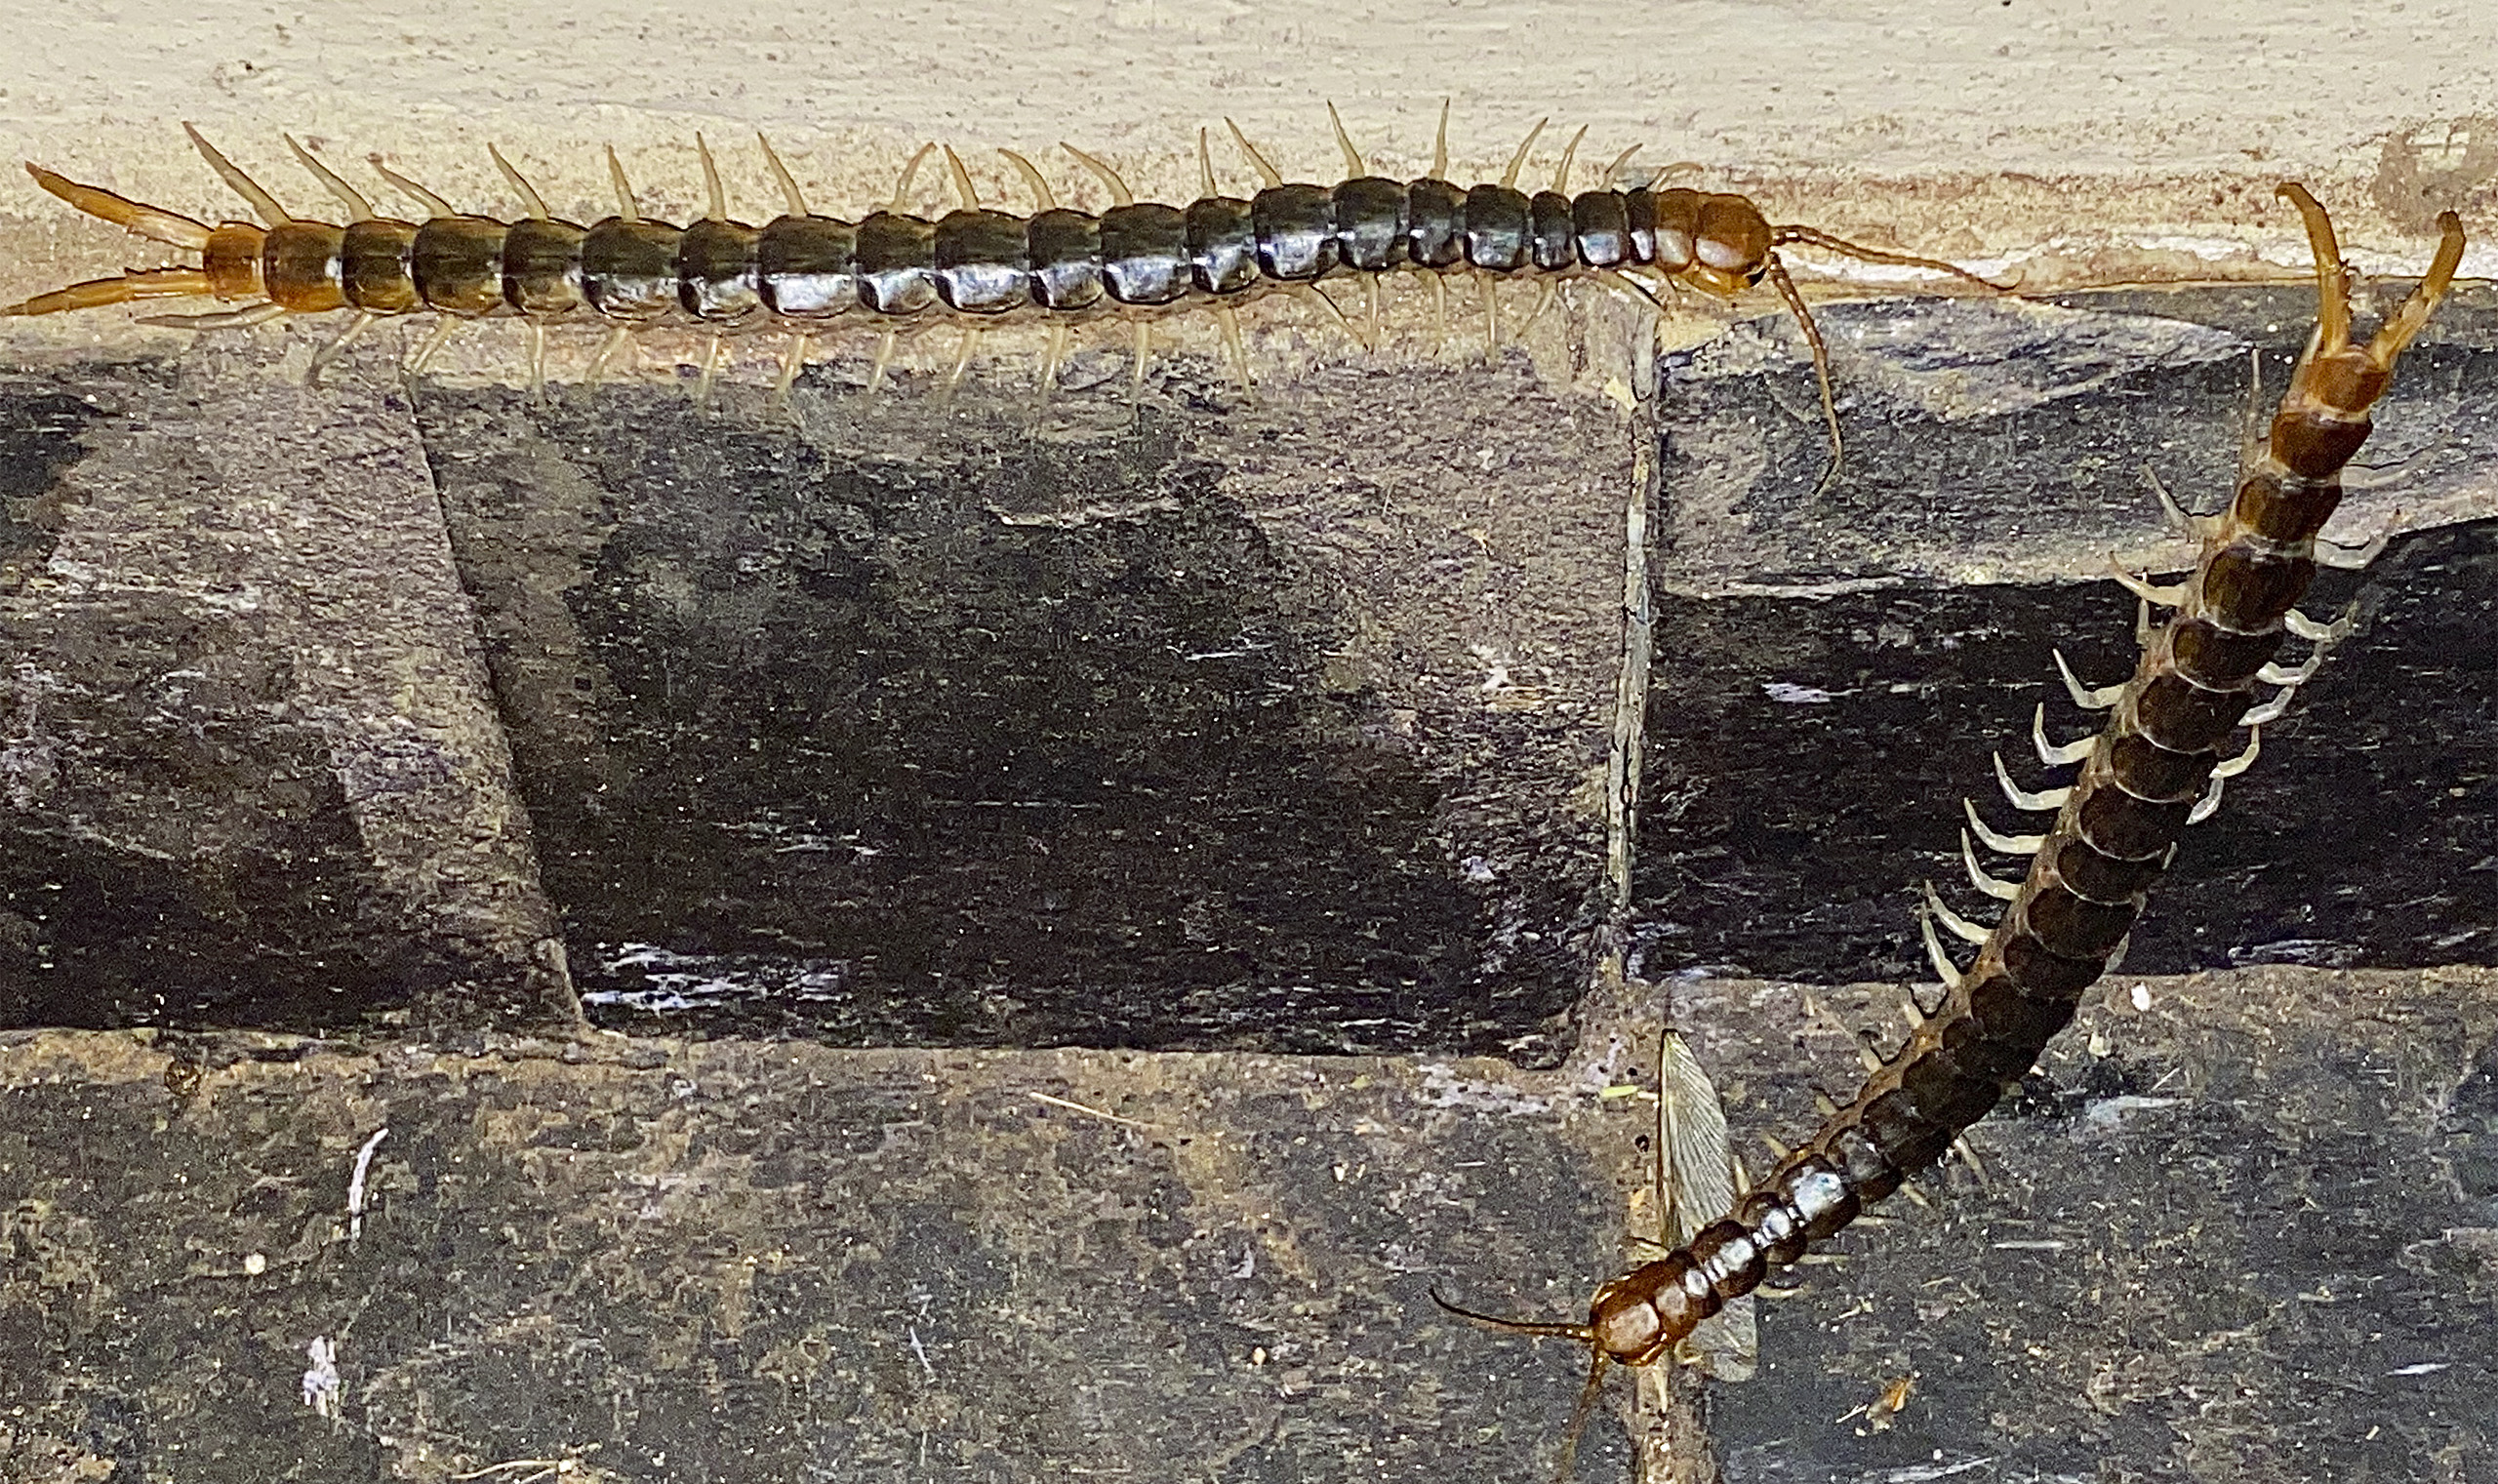 Insect - Centipede